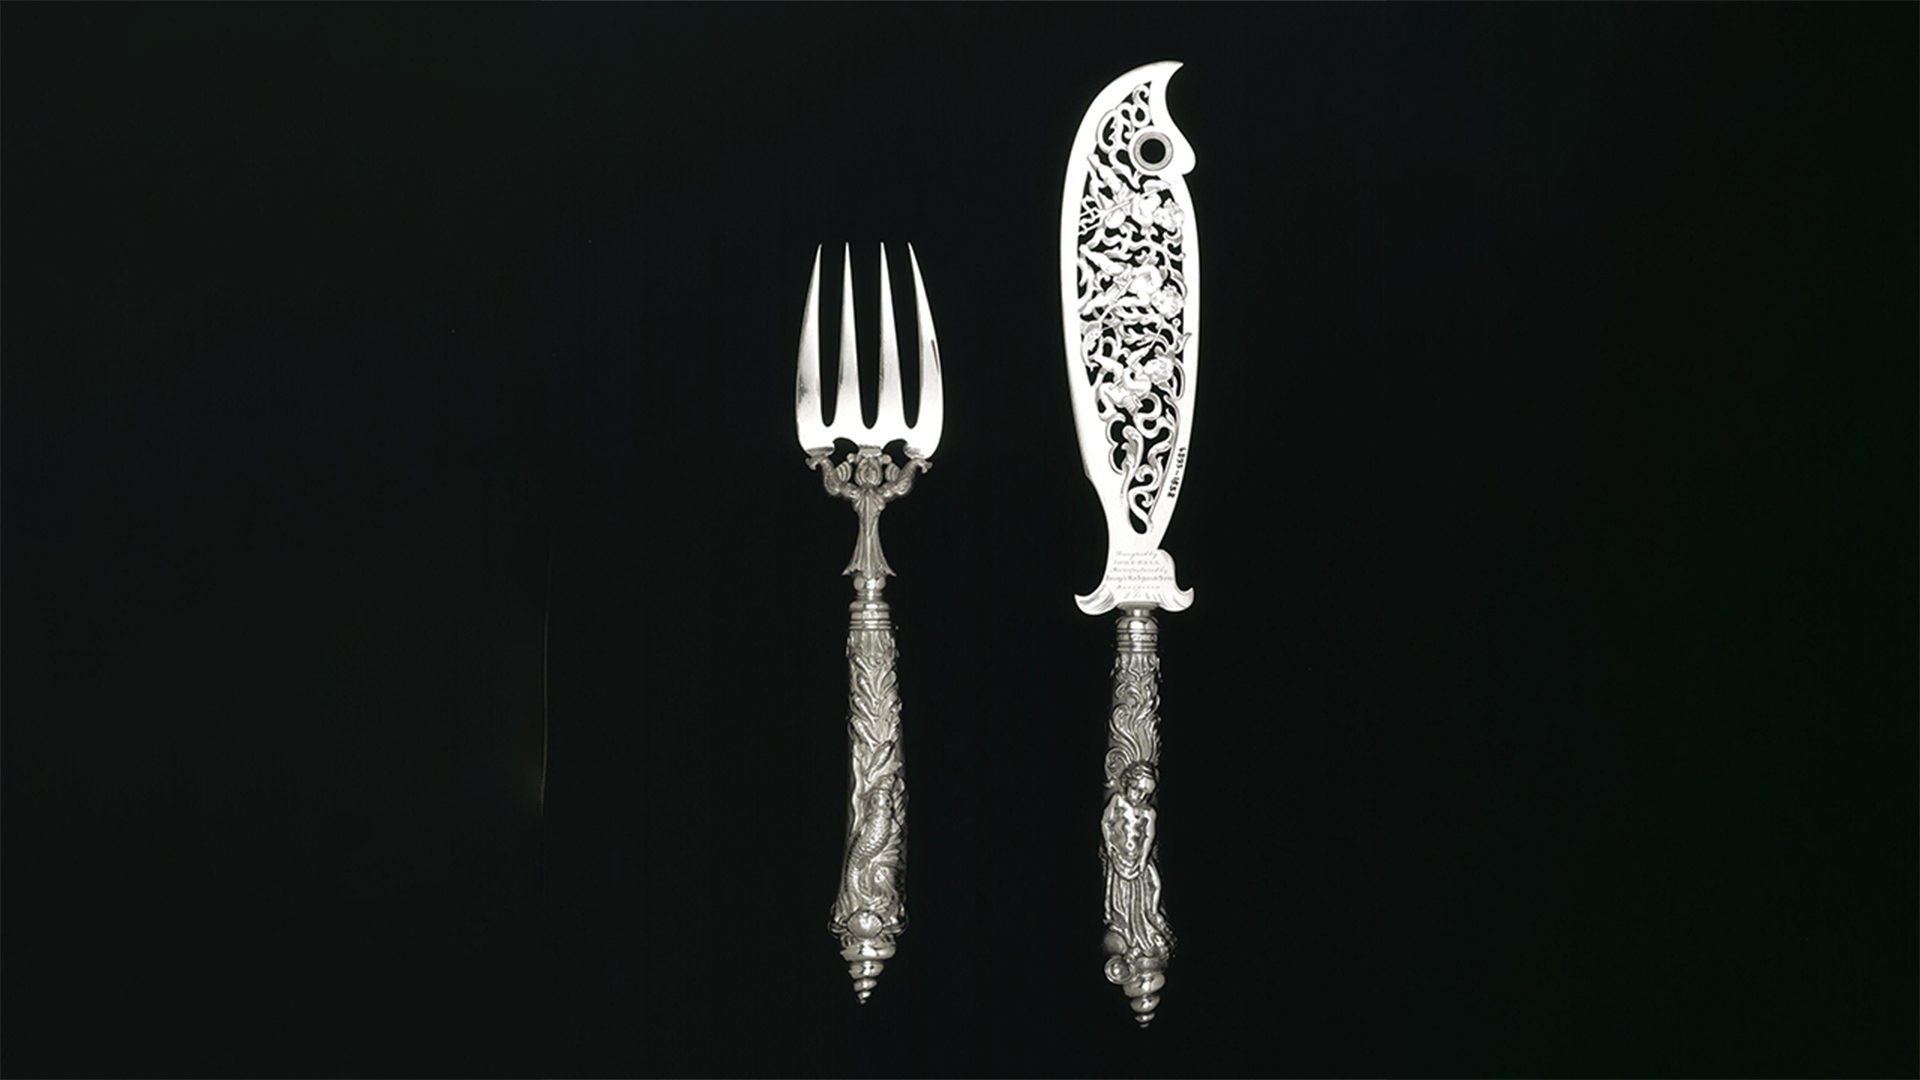 Silver knife with patterned blade